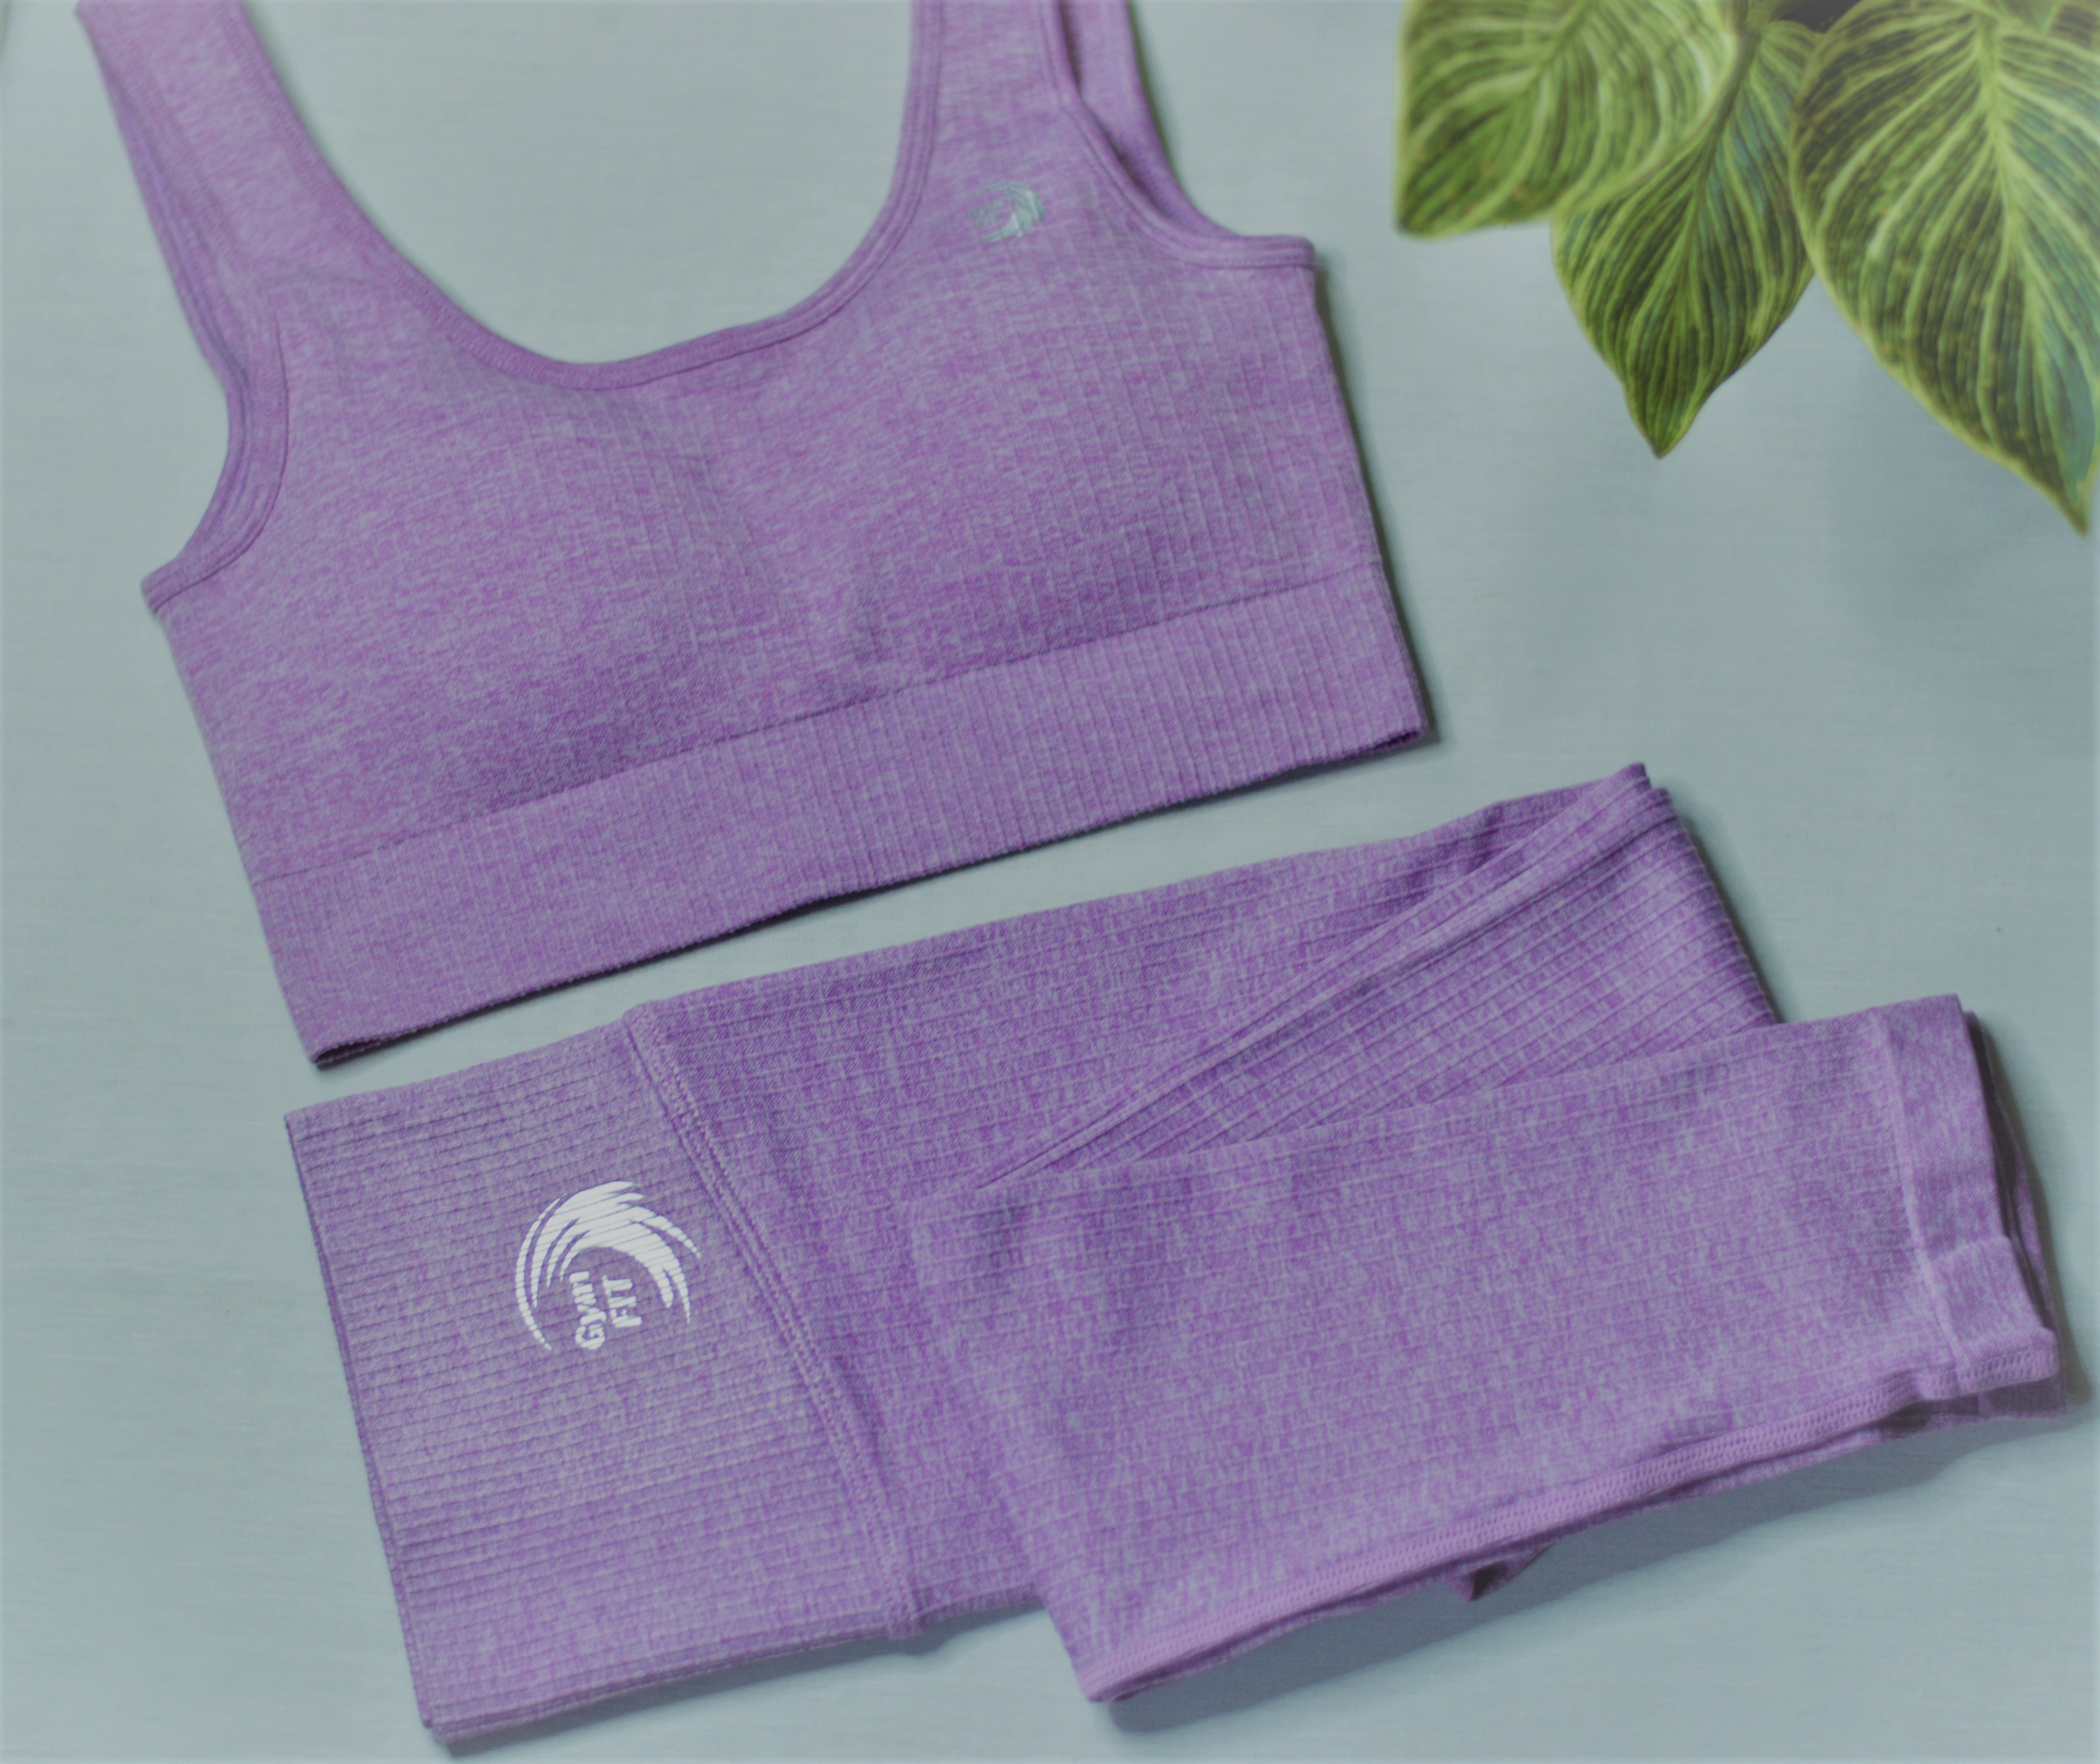 'CLASSIC' Knit Seamless set in Lavender